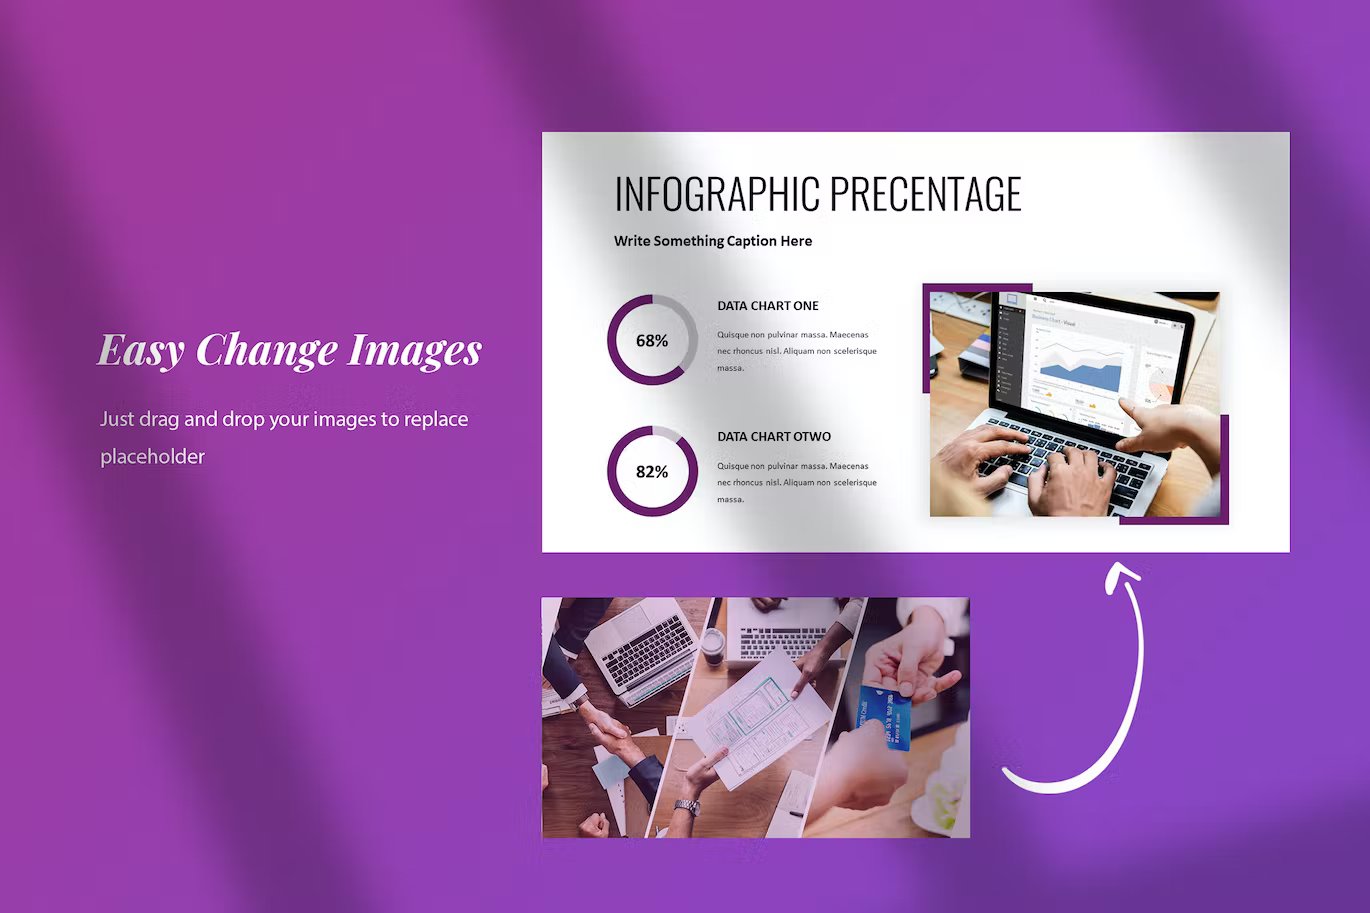 White lettering "Easy Change Images" and 2 different executive - powerpoint presentation for business templates in white, purple and black on a purple background.